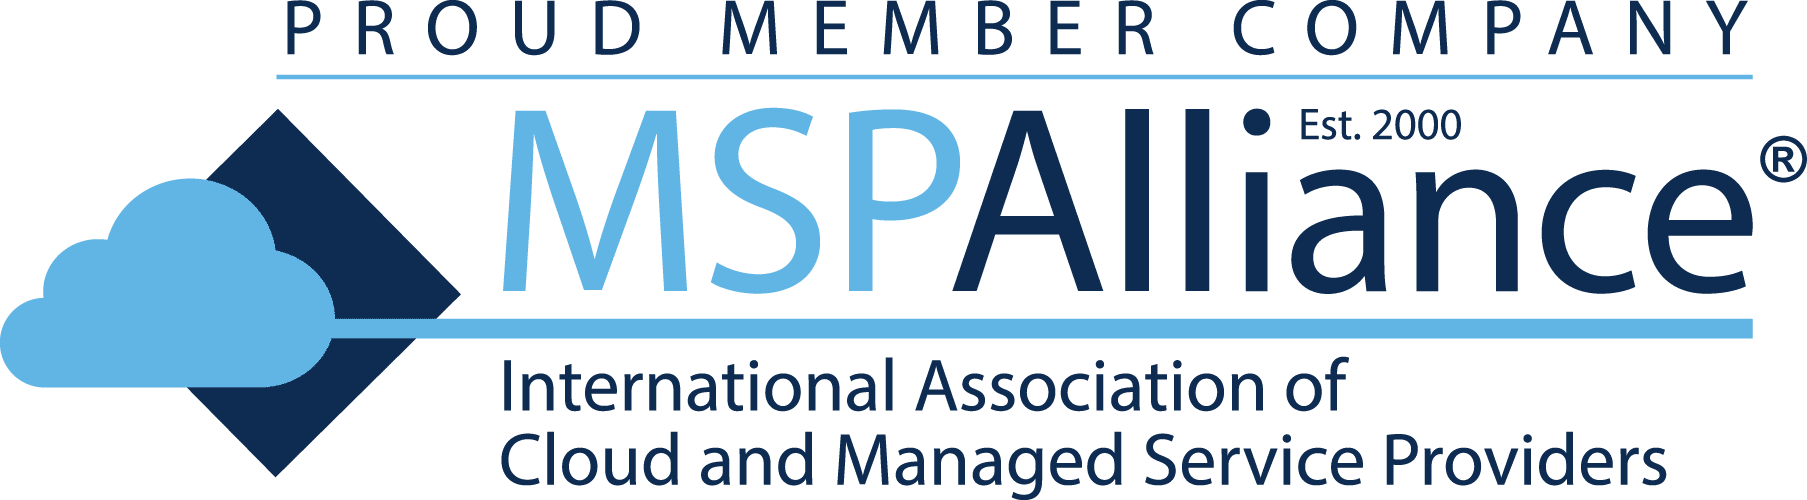 A proud member company logo for mspalliance international association of cloud and managed service providers.